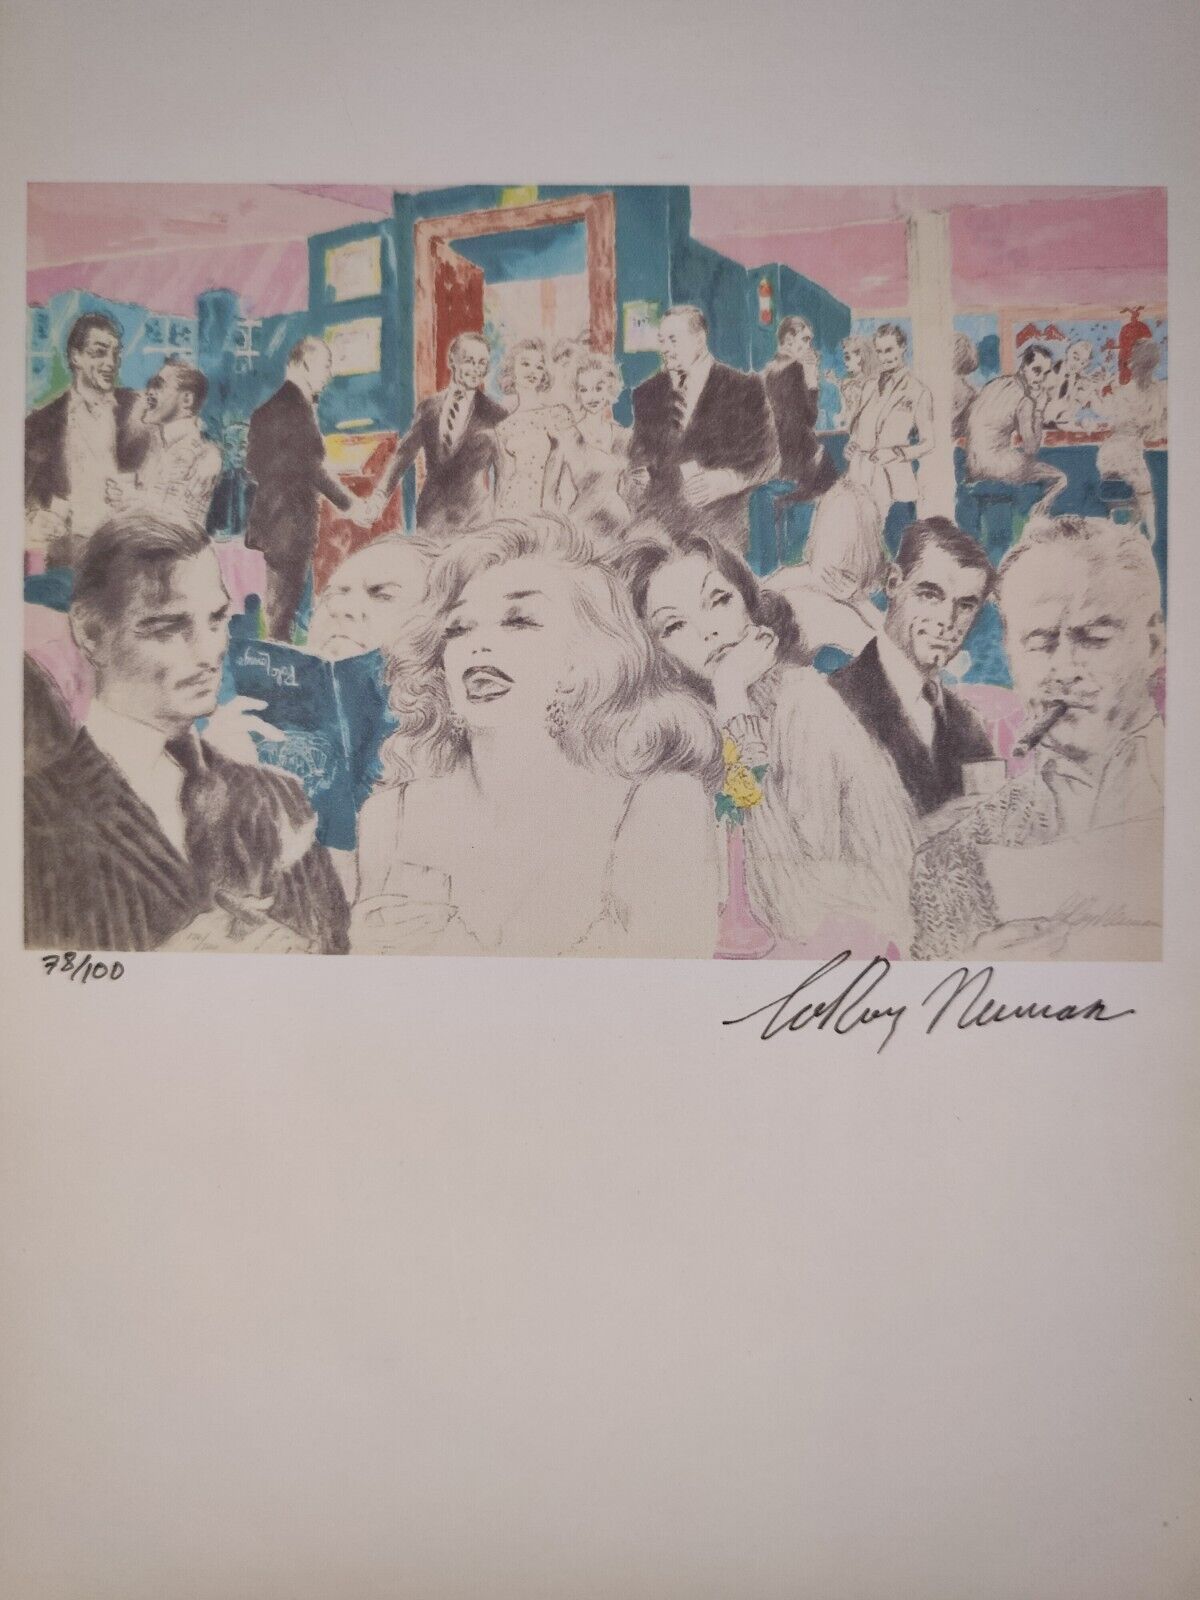 LeRoy Neiman Painting Print Poster Wall Art Signed & Numbered